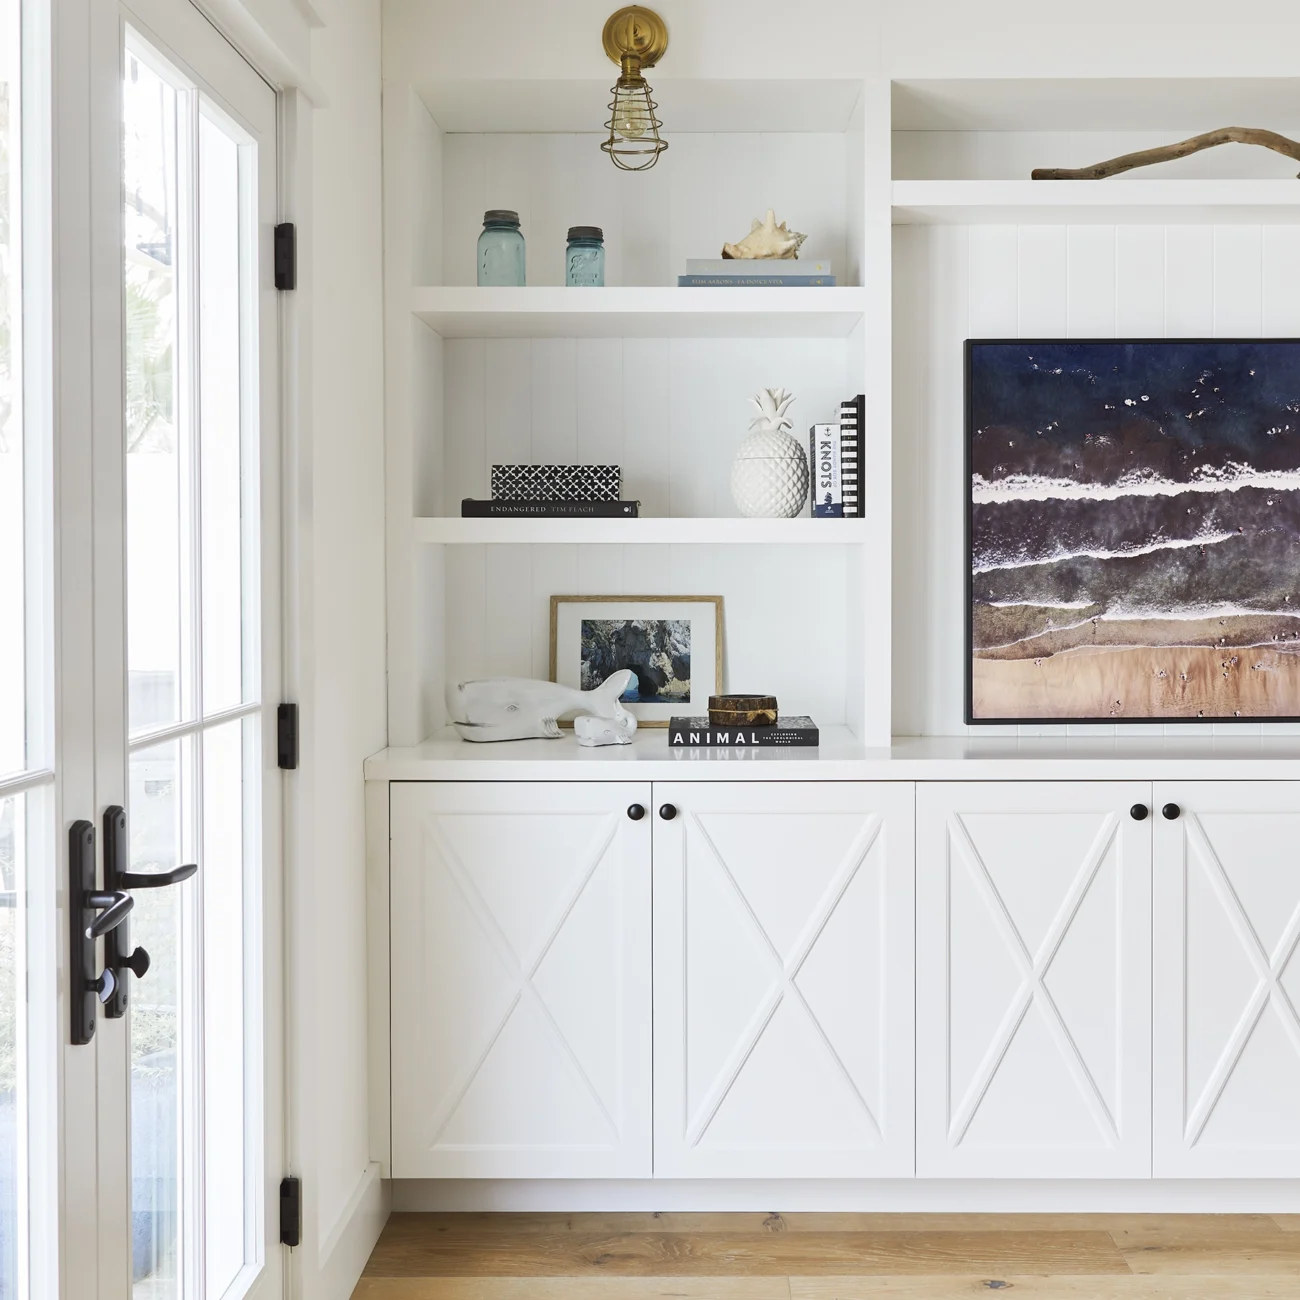 Christine Vroom Interiors | Gentry | Bright, white, Costal living room with built-in cabinets